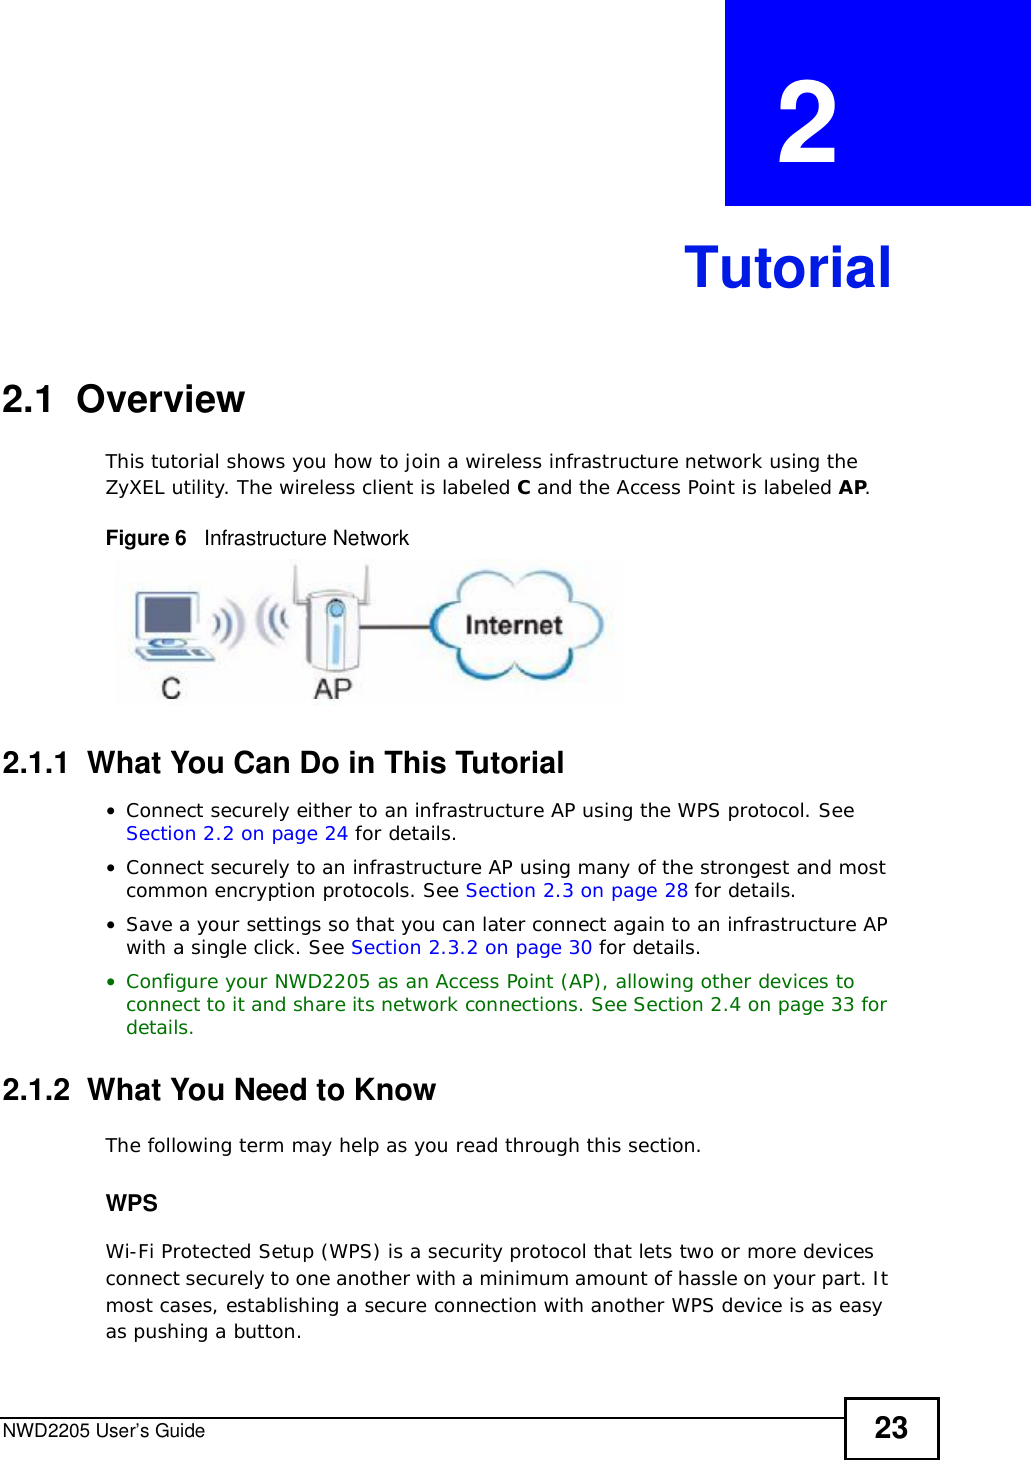 NWD2205 User’s Guide 23CHAPTER  2 Tutorial2.1  OverviewThis tutorial shows you how to join a wireless infrastructure network using the ZyXEL utility. The wireless client is labeled C and the Access Point is labeled AP.Figure 6   Infrastructure Network2.1.1  What You Can Do in This Tutorial•Connect securely either to an infrastructure AP using the WPS protocol. See Section 2.2 on page 24 for details.•Connect securely to an infrastructure AP using many of the strongest and most common encryption protocols. See Section 2.3 on page 28 for details.•Save a your settings so that you can later connect again to an infrastructure AP with a single click. See Section 2.3.2 on page 30 for details.•Configure your NWD2205 as an Access Point (AP), allowing other devices to connect to it and share its network connections. See Section 2.4 on page 33 for details.2.1.2  What You Need to KnowThe following term may help as you read through this section.WPSWi-Fi Protected Setup (WPS) is a security protocol that lets two or more devices connect securely to one another with a minimum amount of hassle on your part. It most cases, establishing a secure connection with another WPS device is as easy as pushing a button.